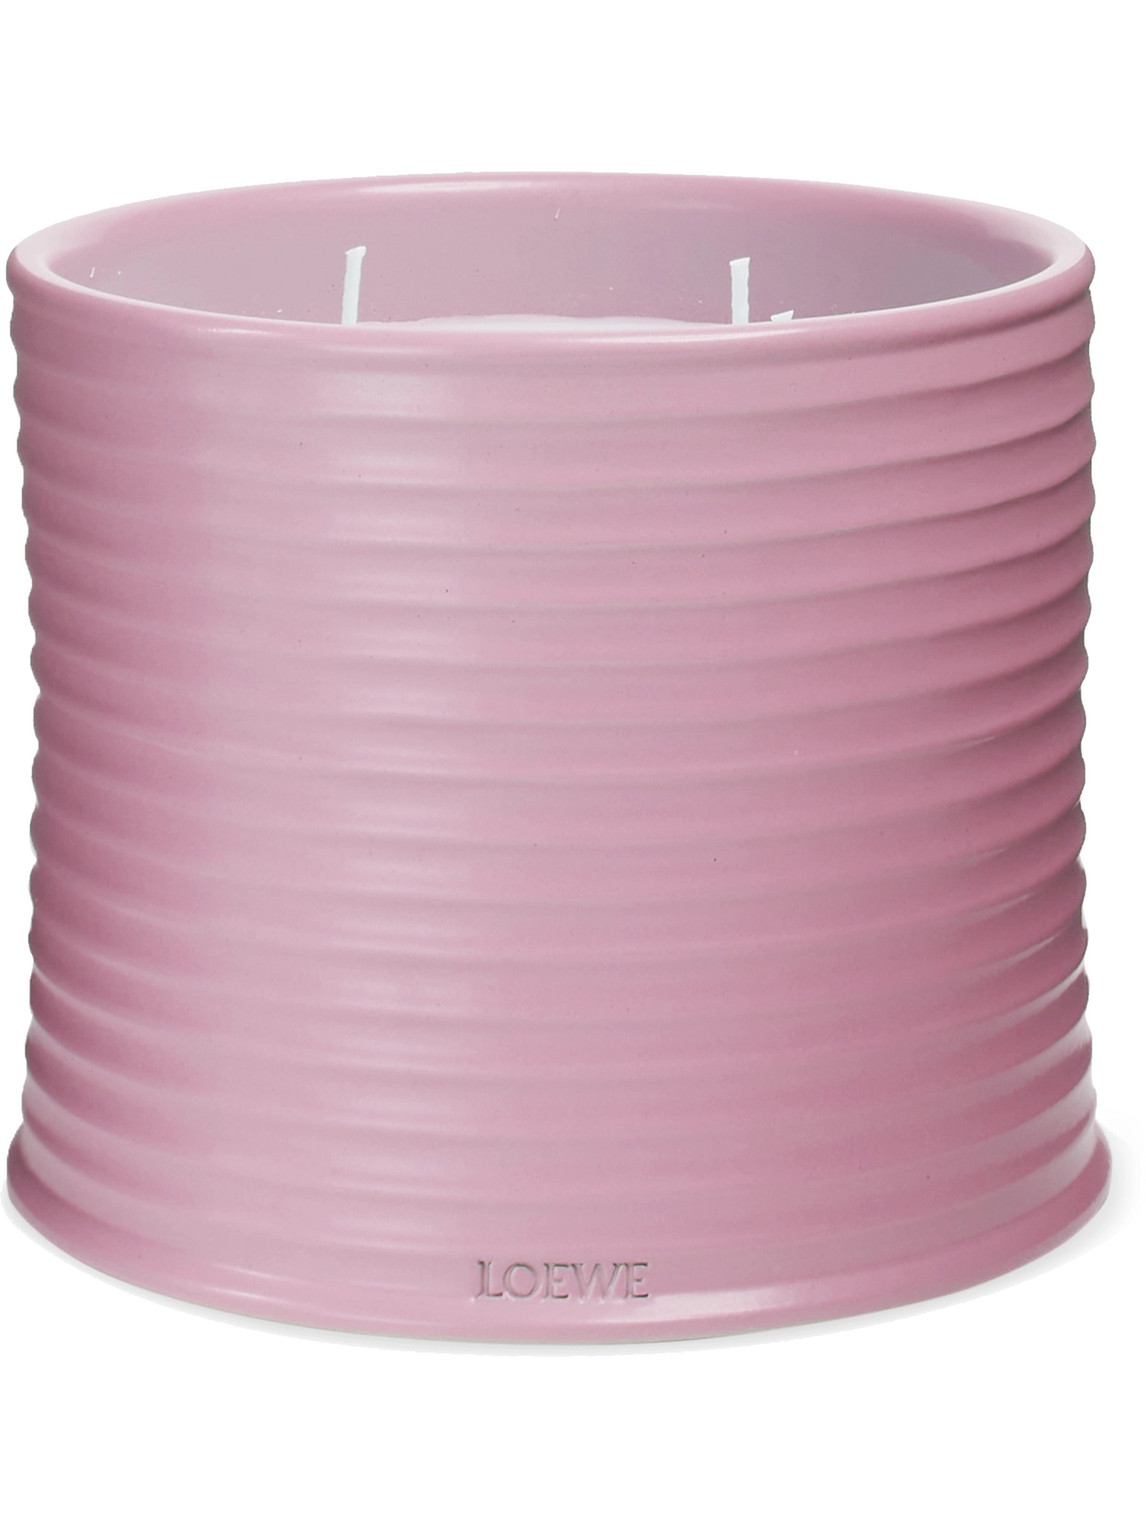 Loewe Ivy Scented Candle, 2120g In Colourless